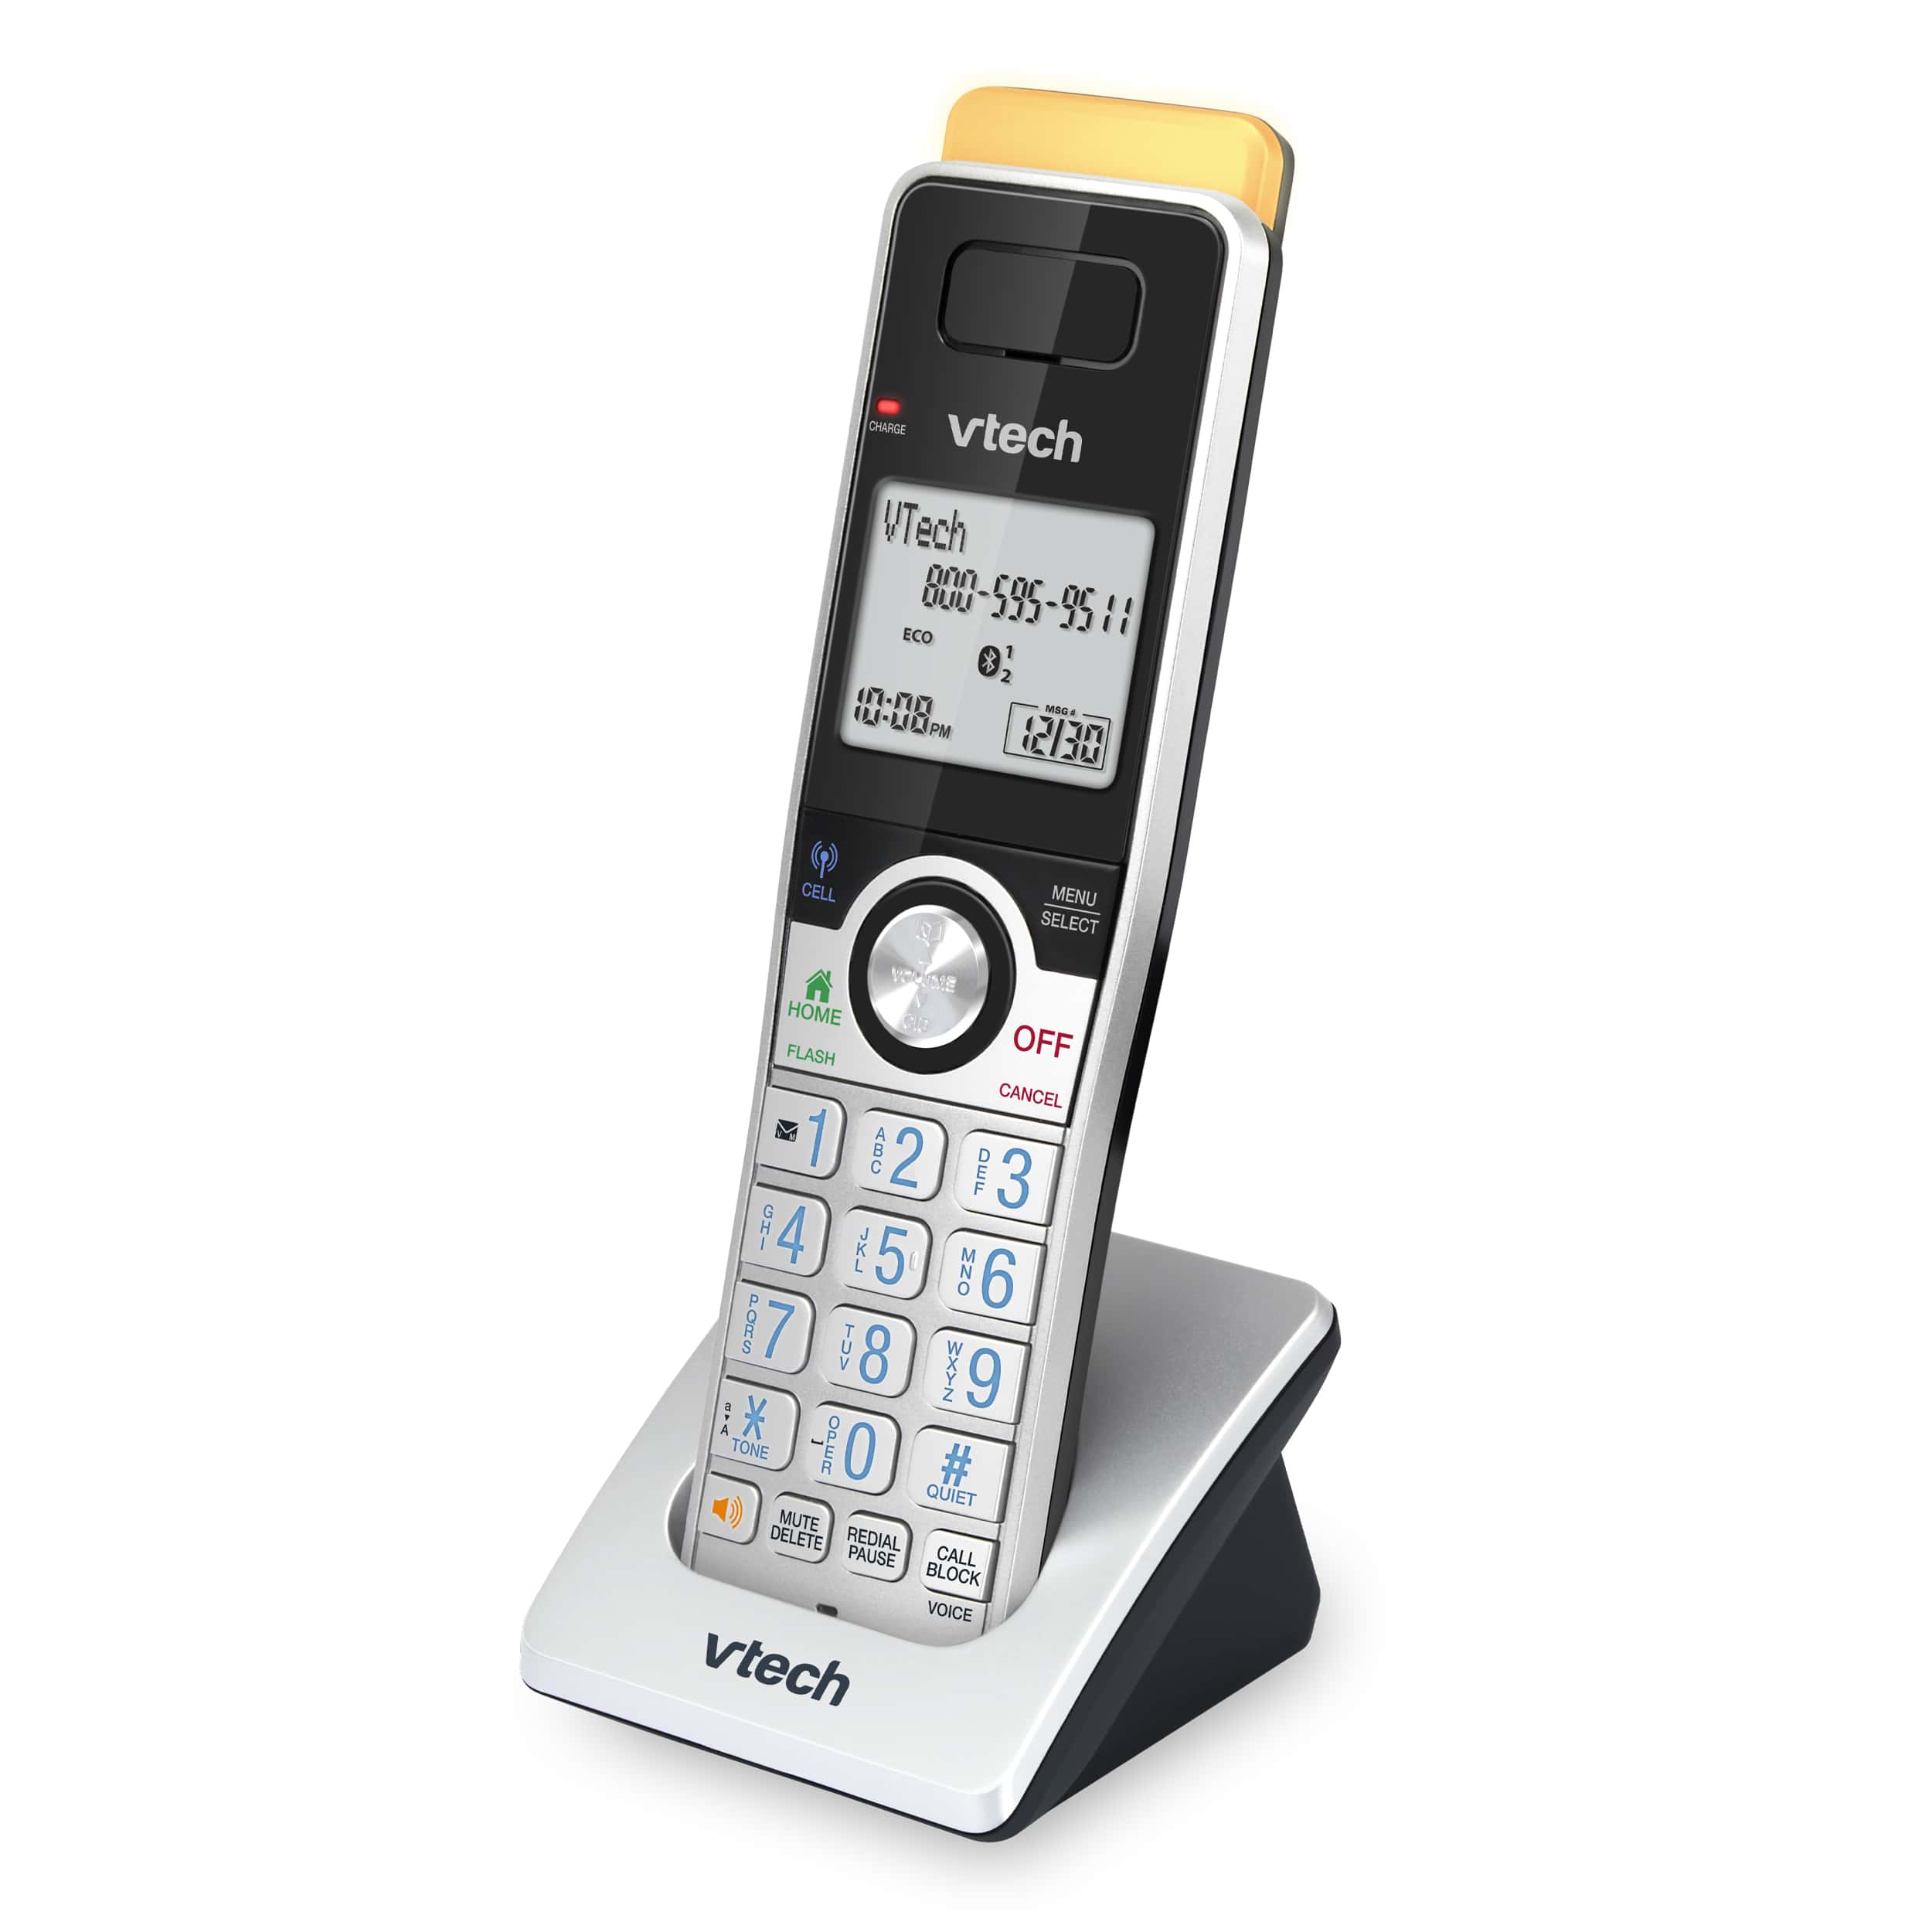 Accessory Handset with Super Long Range, Bluetooth Connect to Cell, and Smart Call Blocker